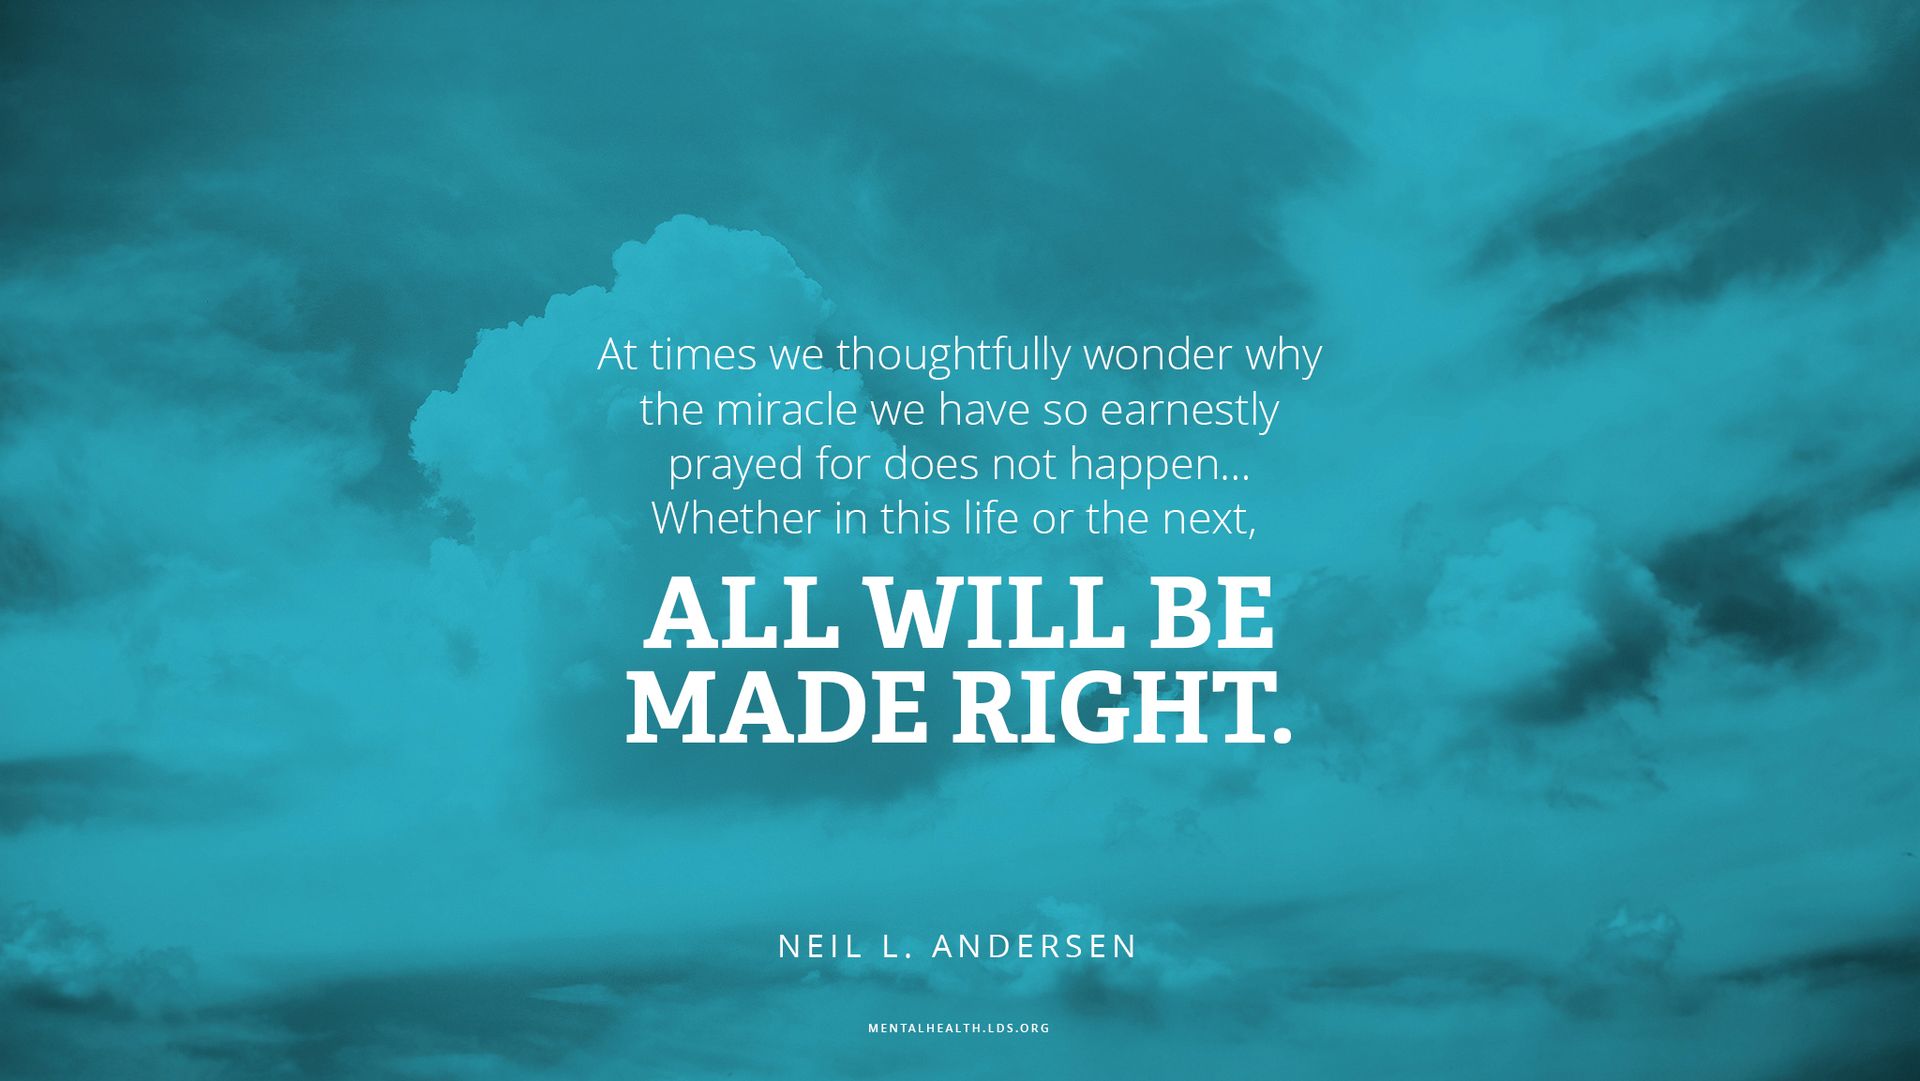 “At times we thoughtfully wonder why the miracle we have so earnestly prayed for does not happen … Whether in this life or the next, all will be made right.”—Elder Neil L. Andersen, “What Thinks Christ of Me?”